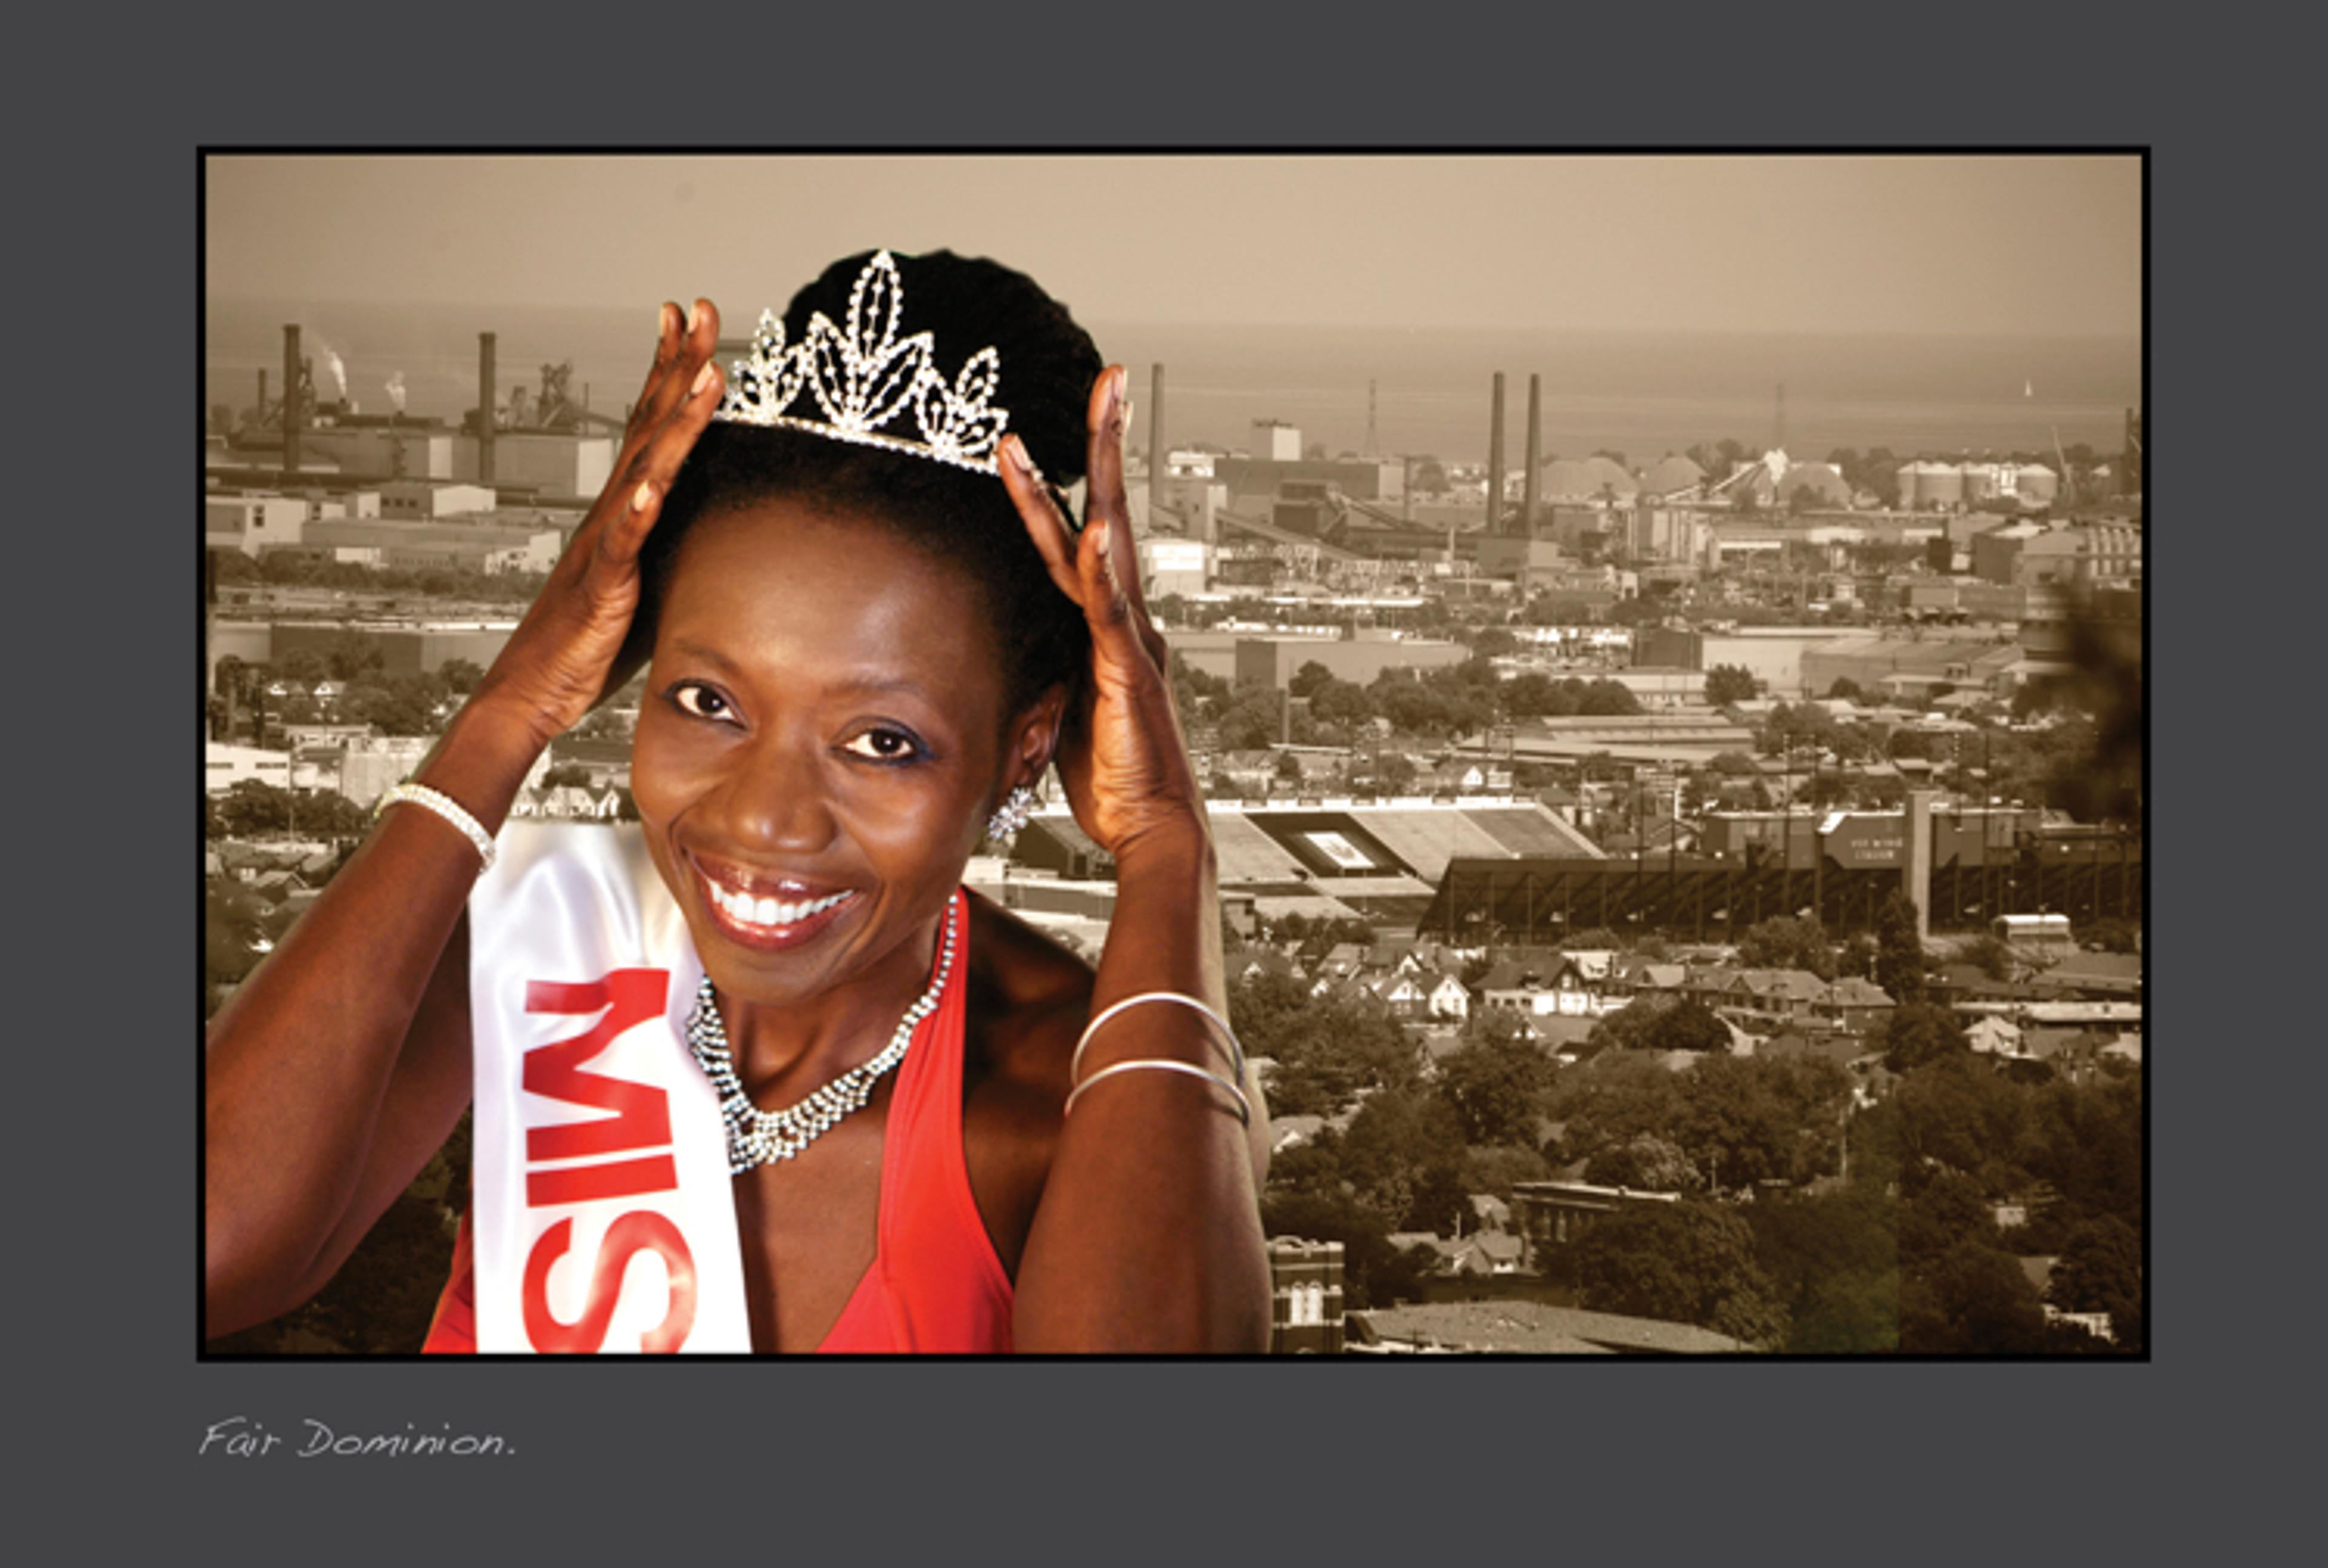 The artist Camille Turner holds up her diamond crown with an industrial scene in the background.